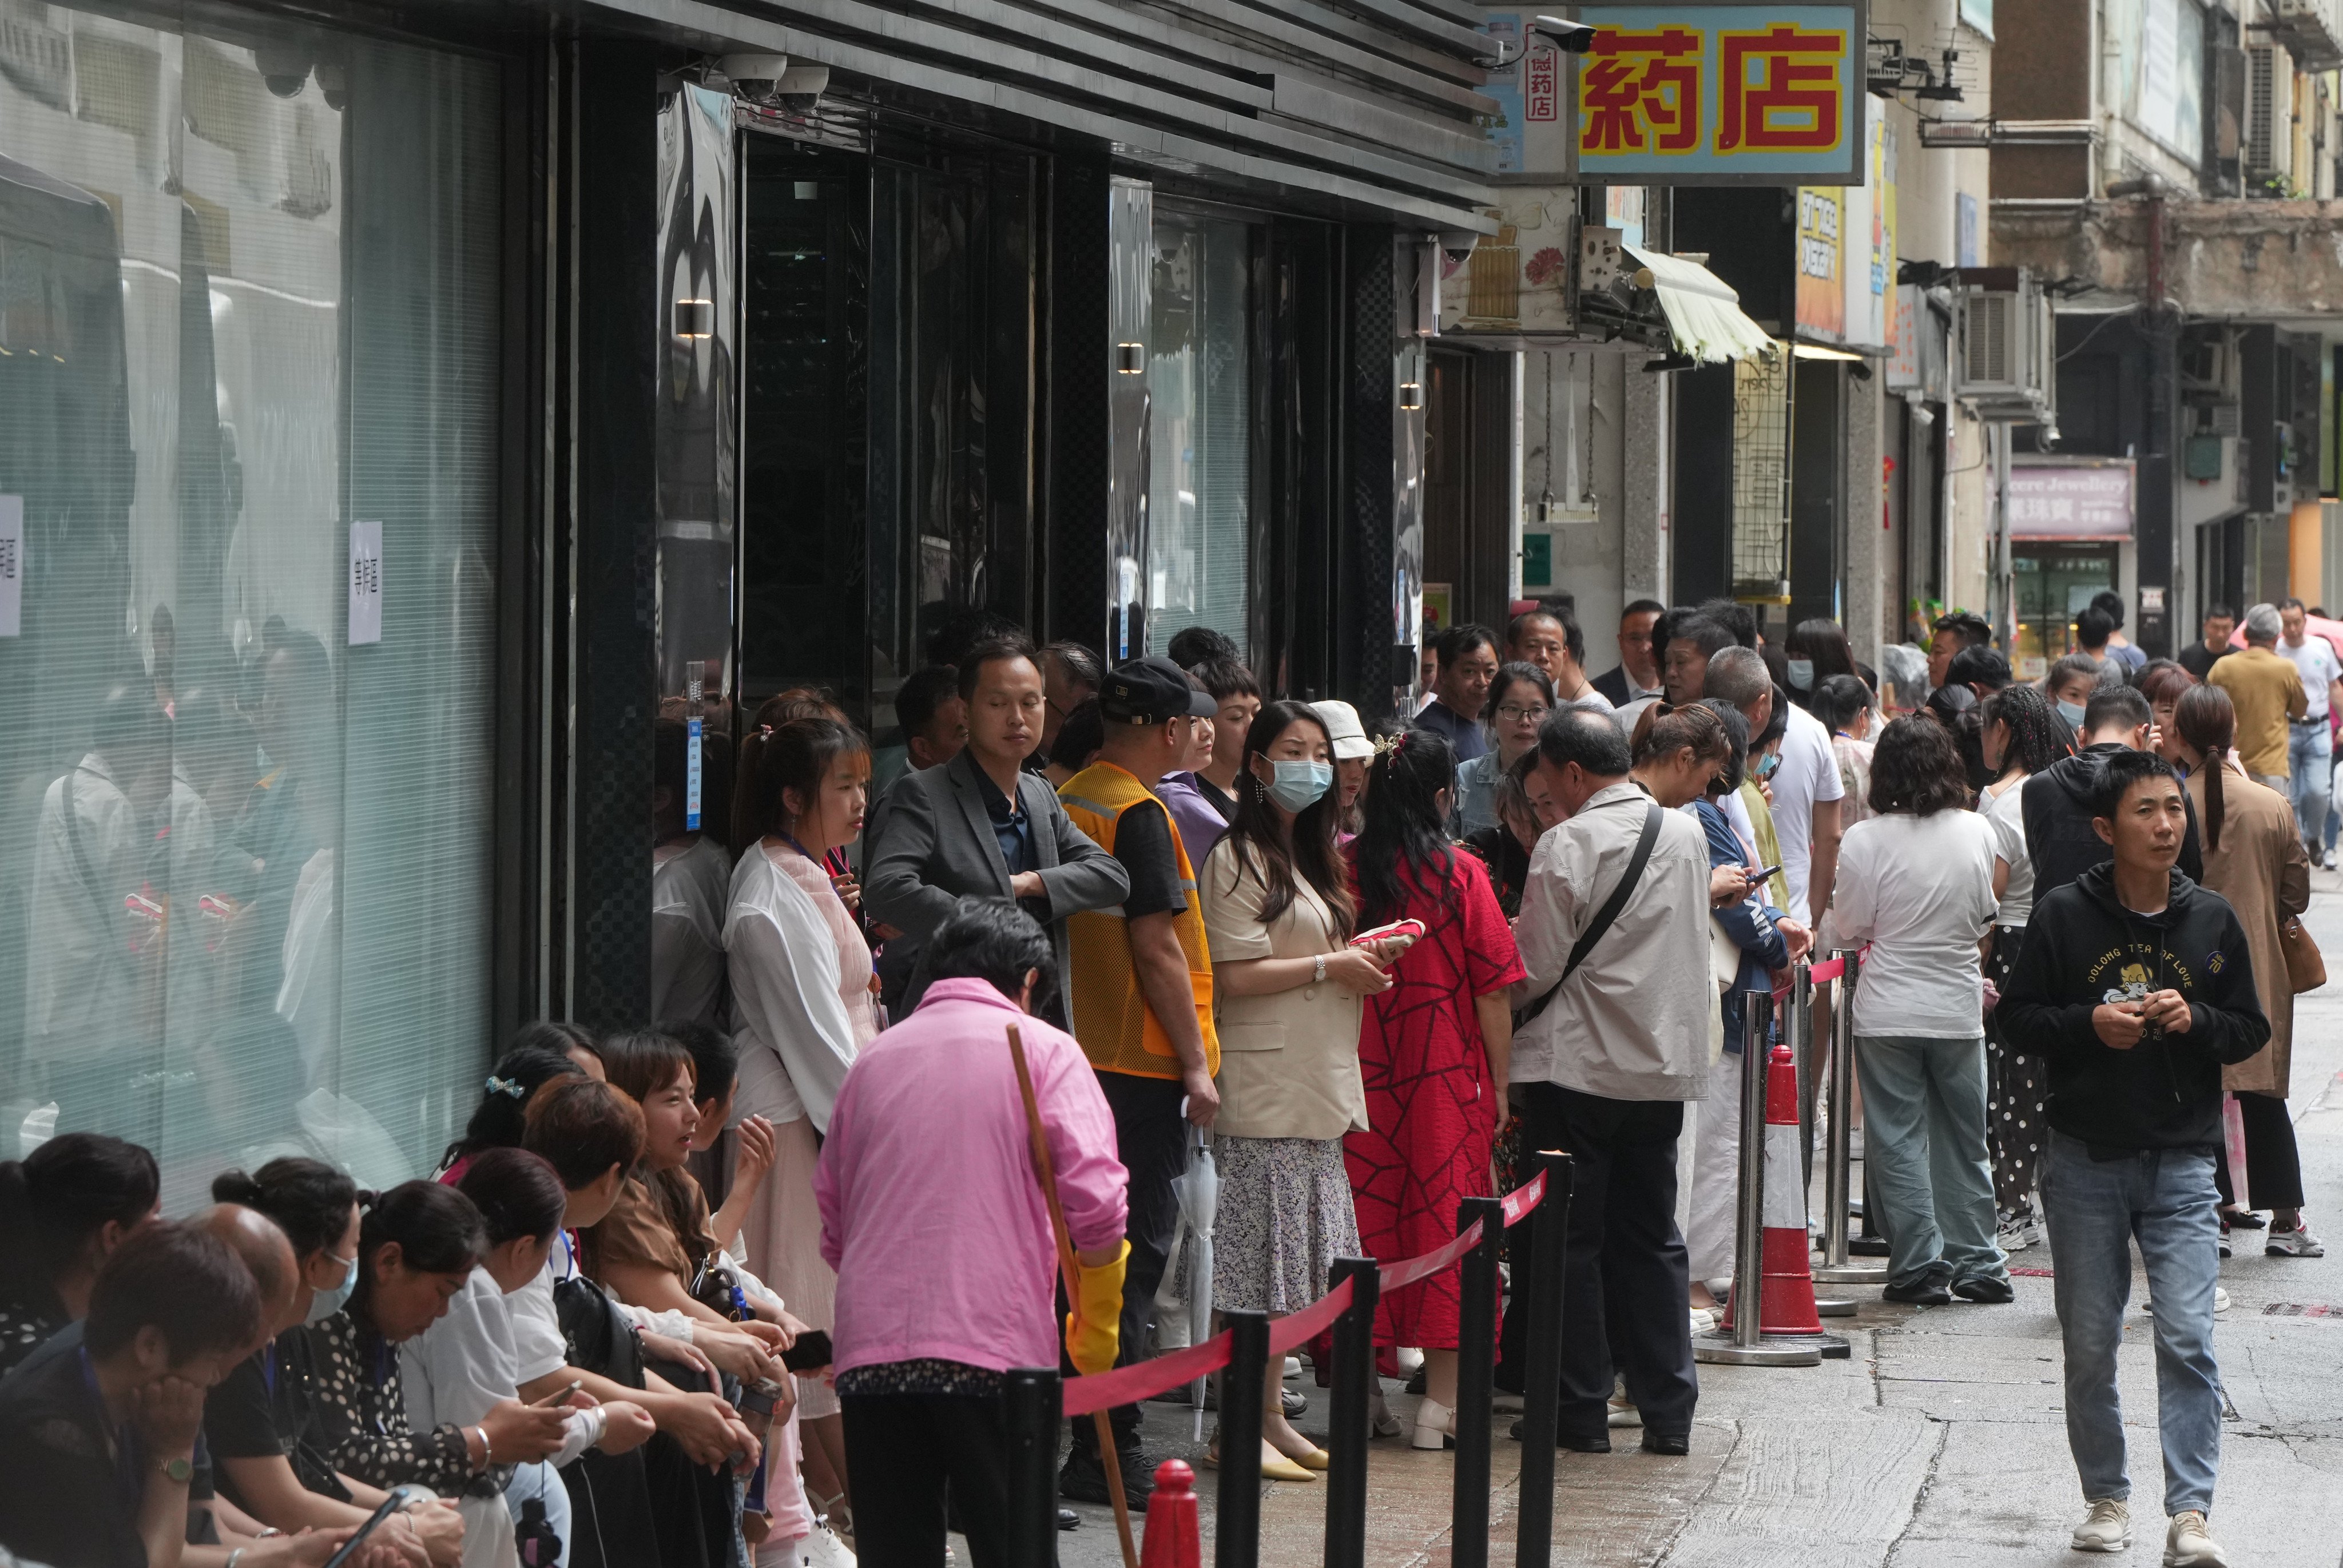 A group of tourists from the mainland queues outside a jewellery shop in To Kwa Wan on May 17. Allegations of Cathay Pacific flight crew discriminating against mainlanders are just the latest example of tensions that have a long history in Hong Kong. Photo: Sam Tsang